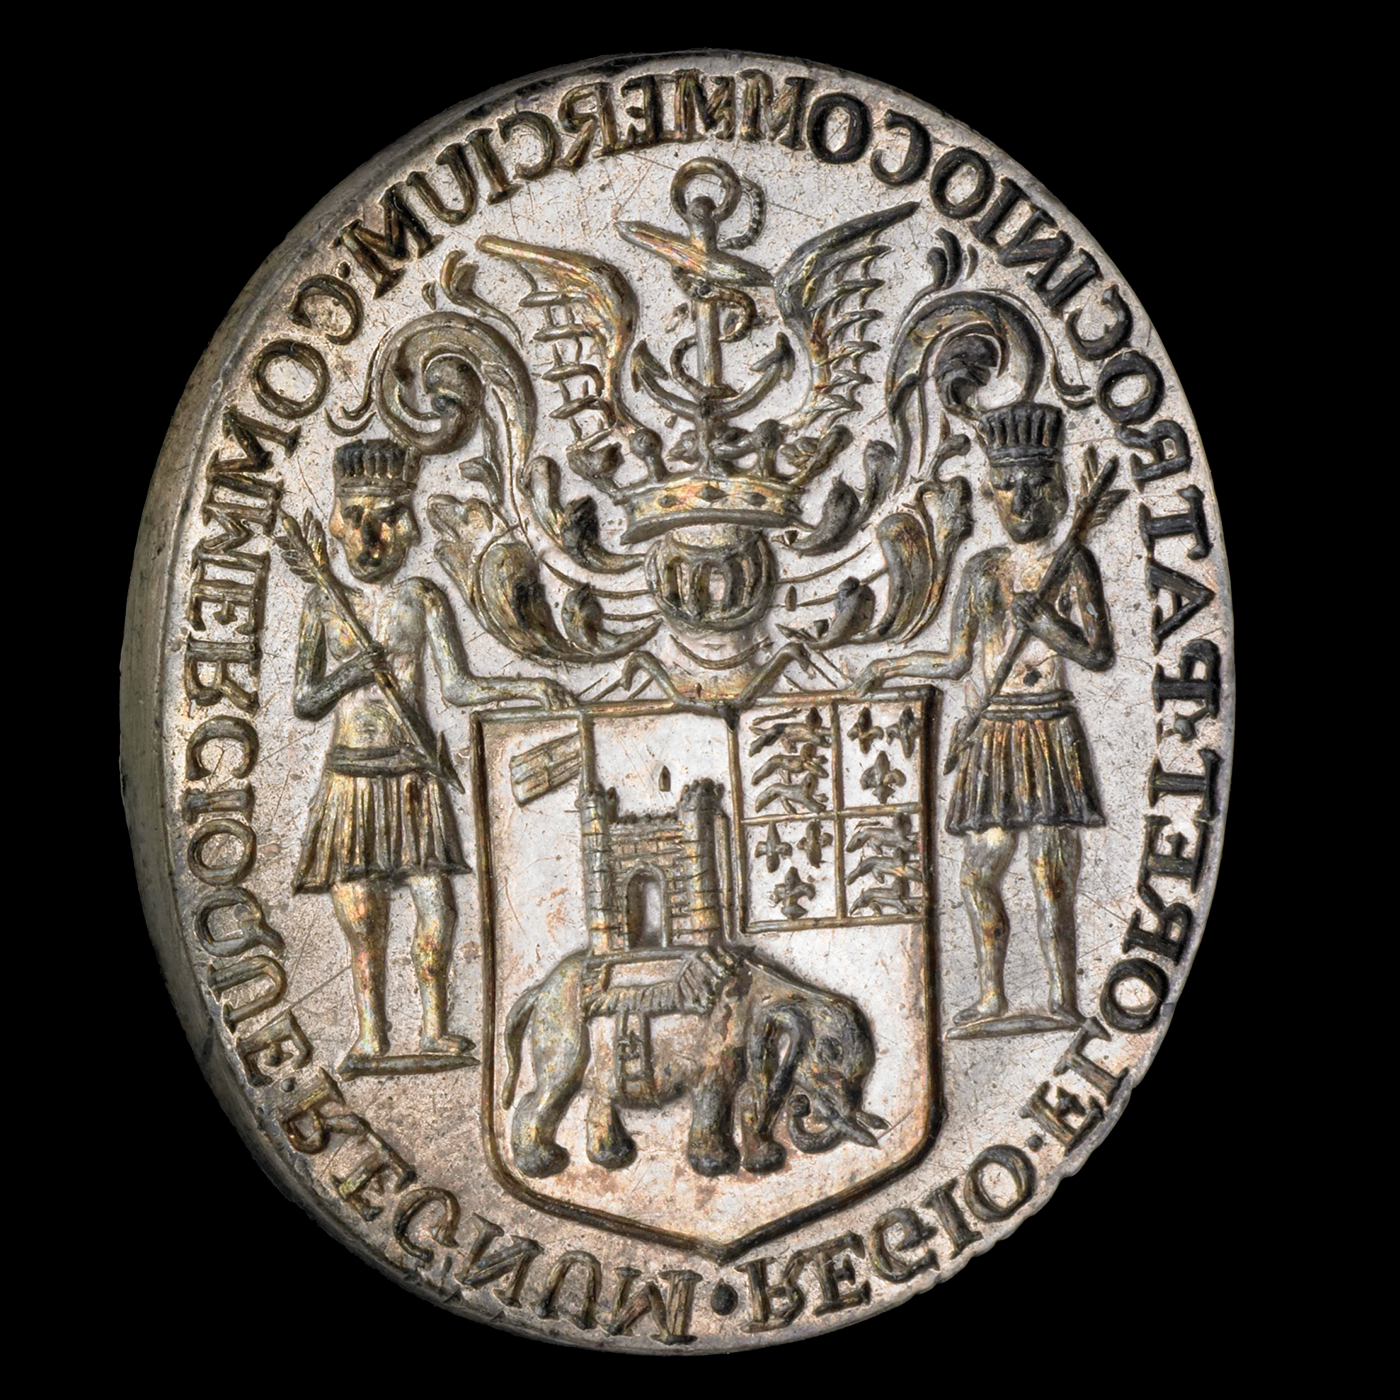 a wax seal stamp with the logo of the Royal African Company